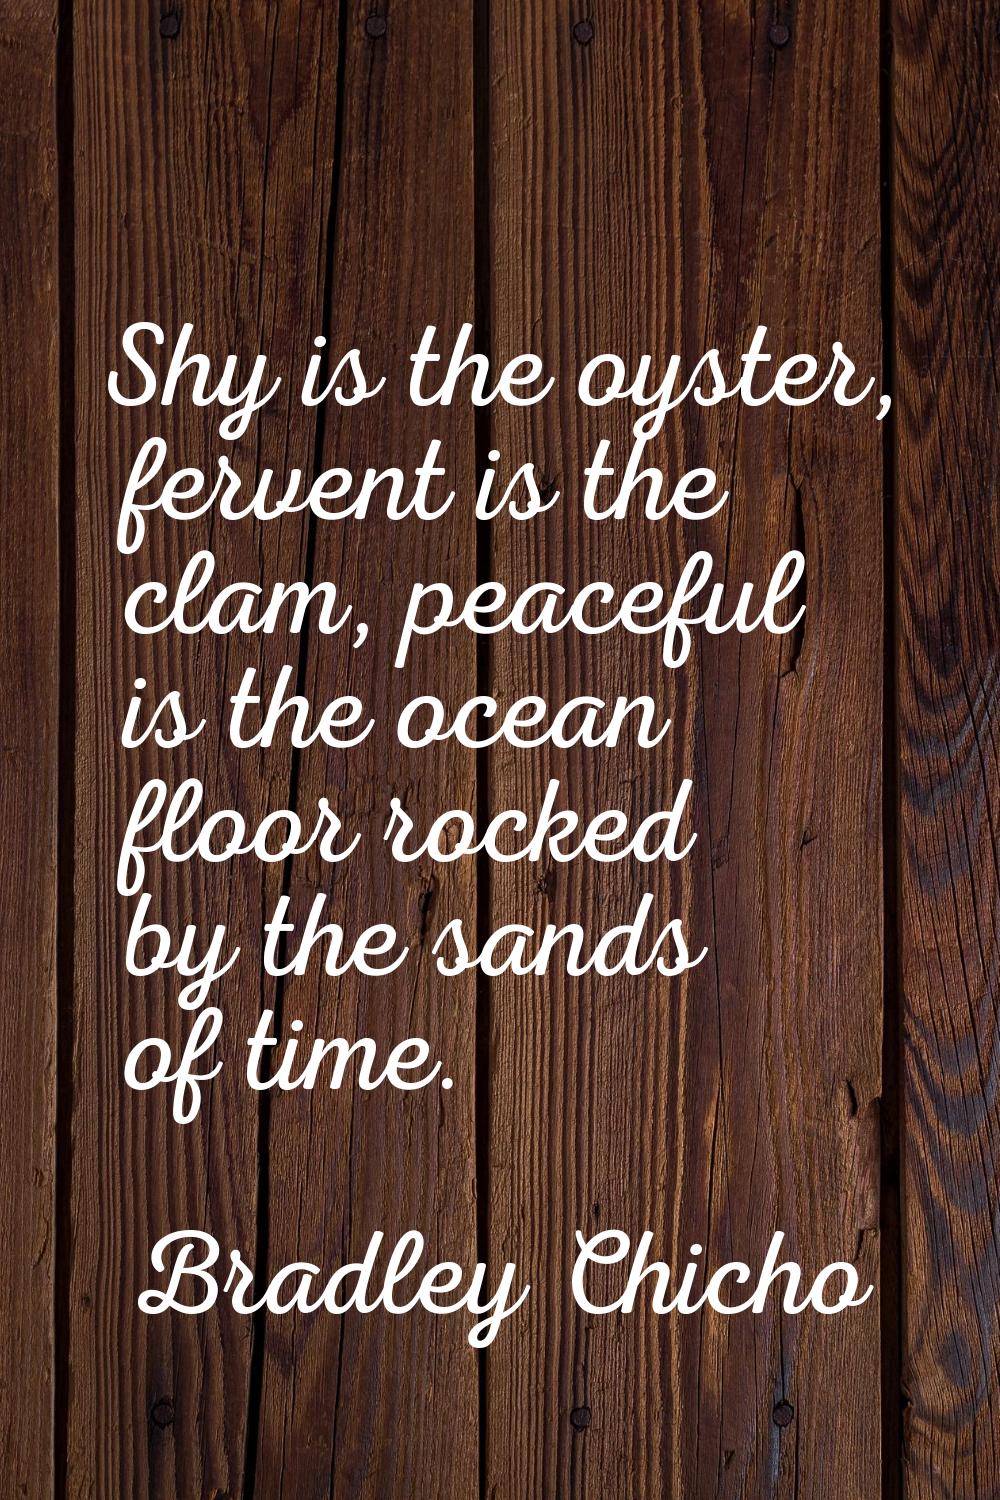 Shy is the oyster, fervent is the clam, peaceful is the ocean floor rocked by the sands of time.